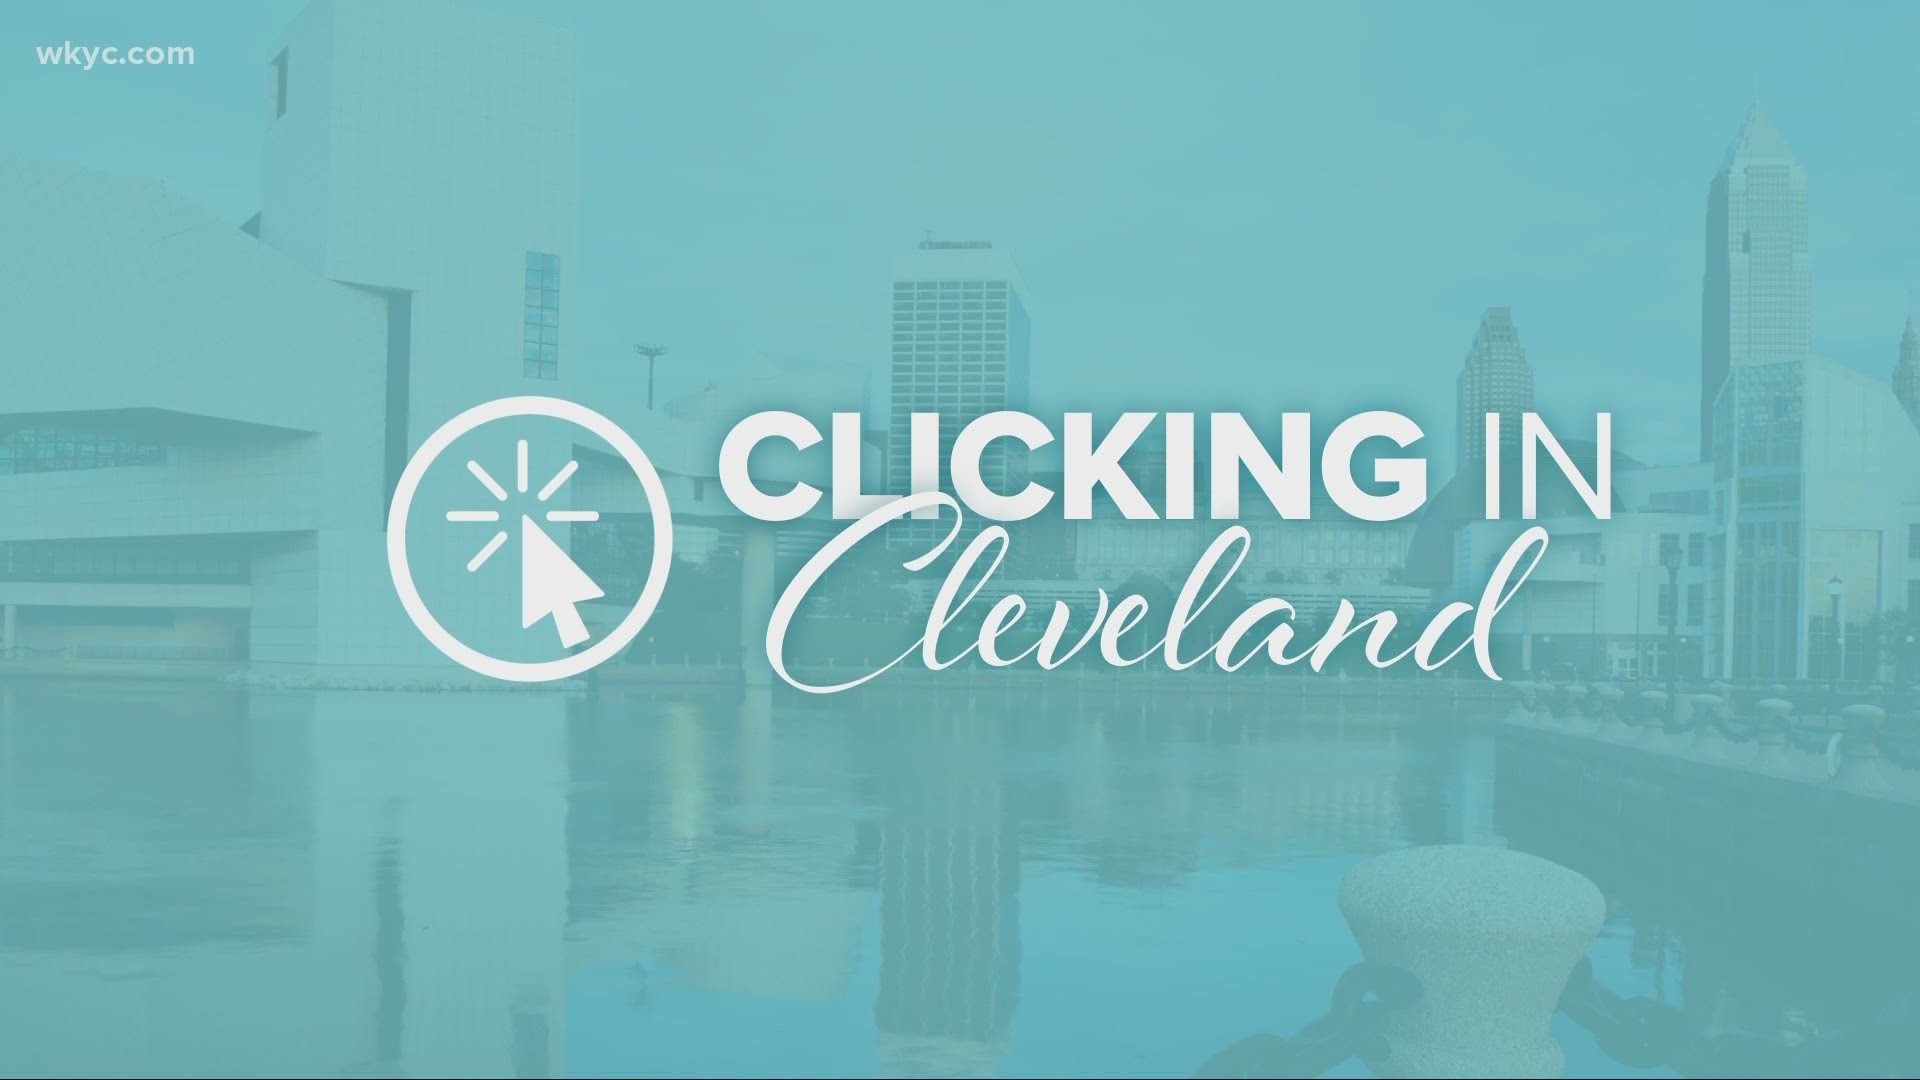 What's trending in Northeast Ohio today?  3News digital anchor Stephanie Haney has the latest in 'What's Clicking in Cleveland.'